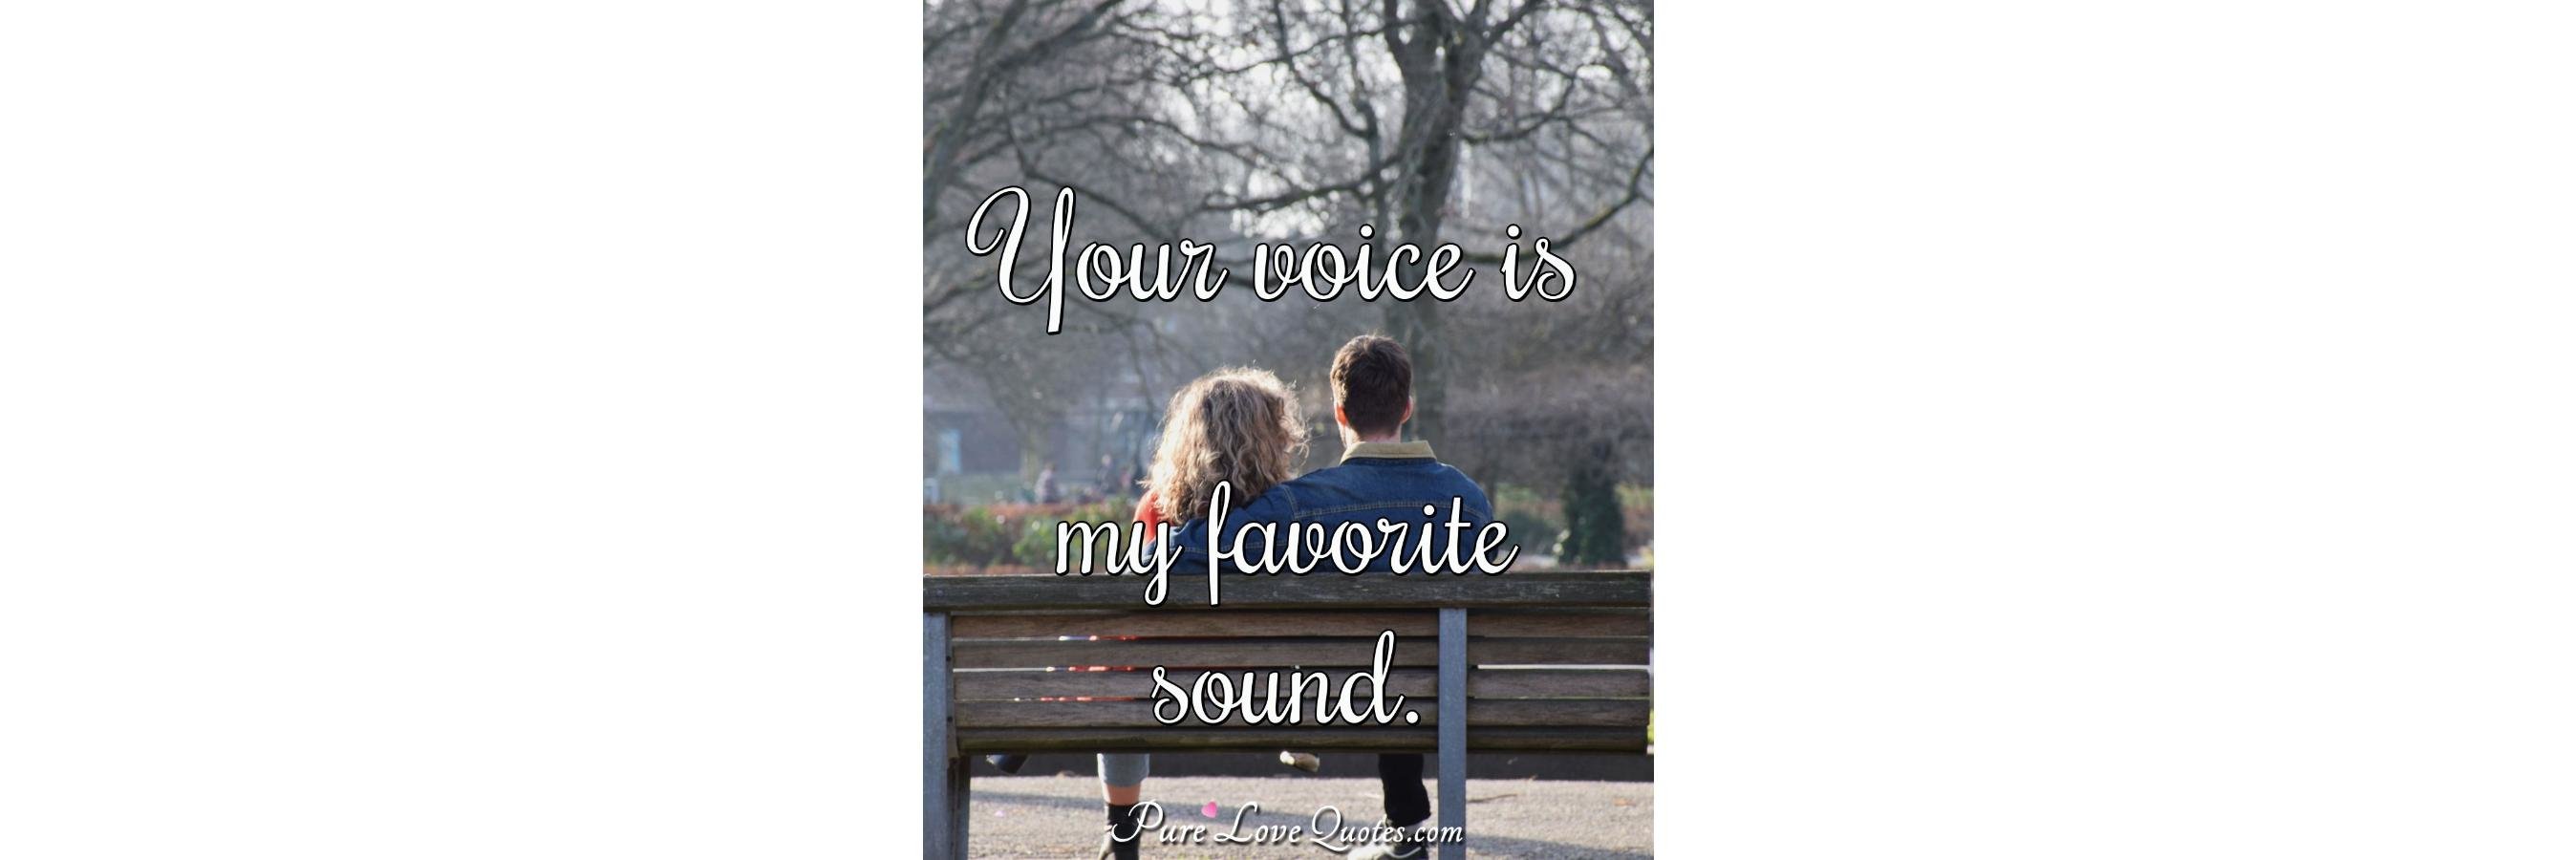 tf your voice is my favorite sound